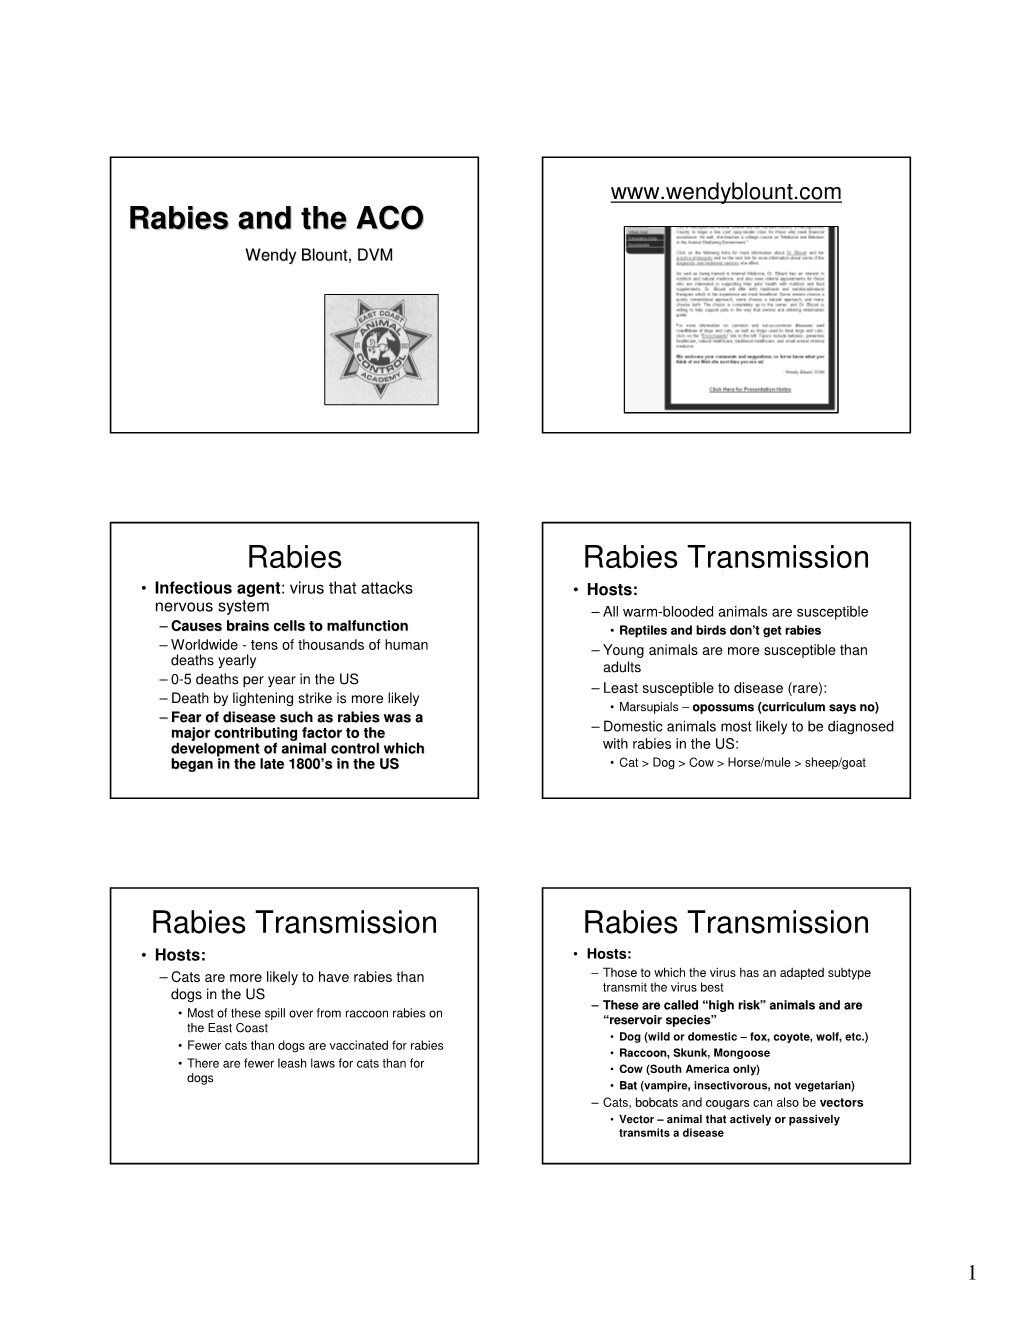 Rabies and the ACO Rabies Rabies Transmission Rabies Transmission